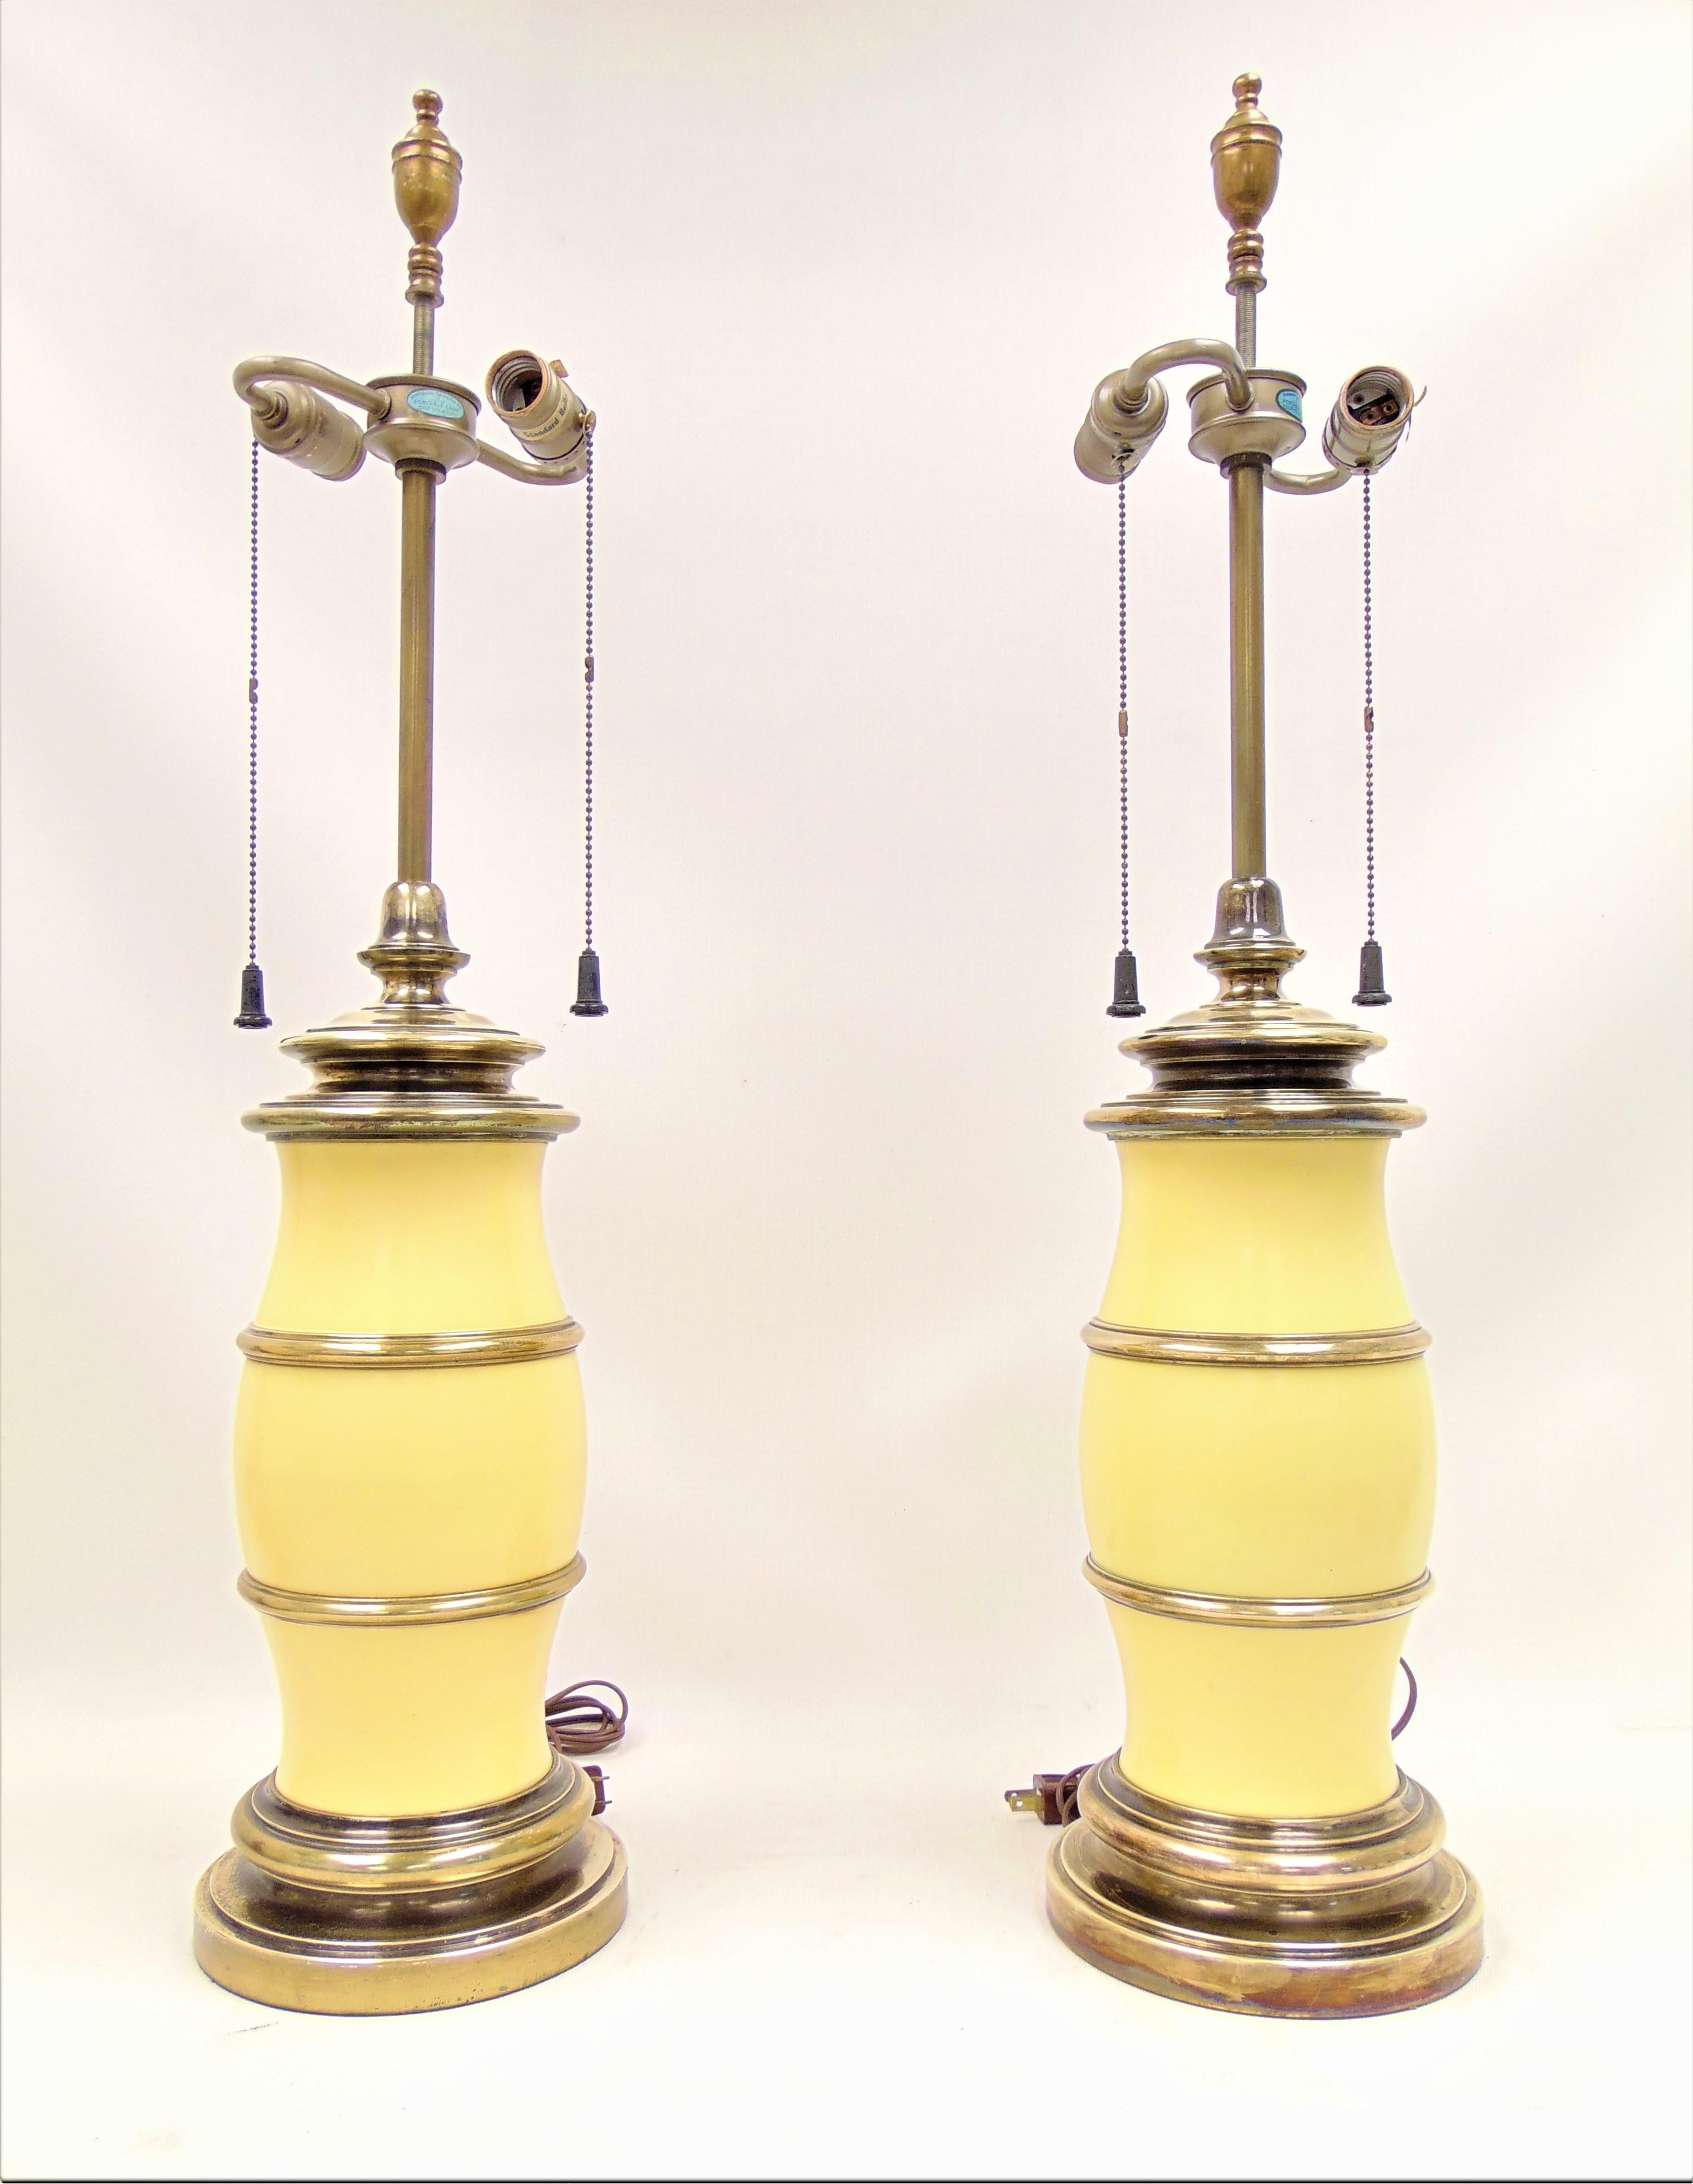 These are a pair of vintage midcentury yellow and brass lamps made by Stiffel.